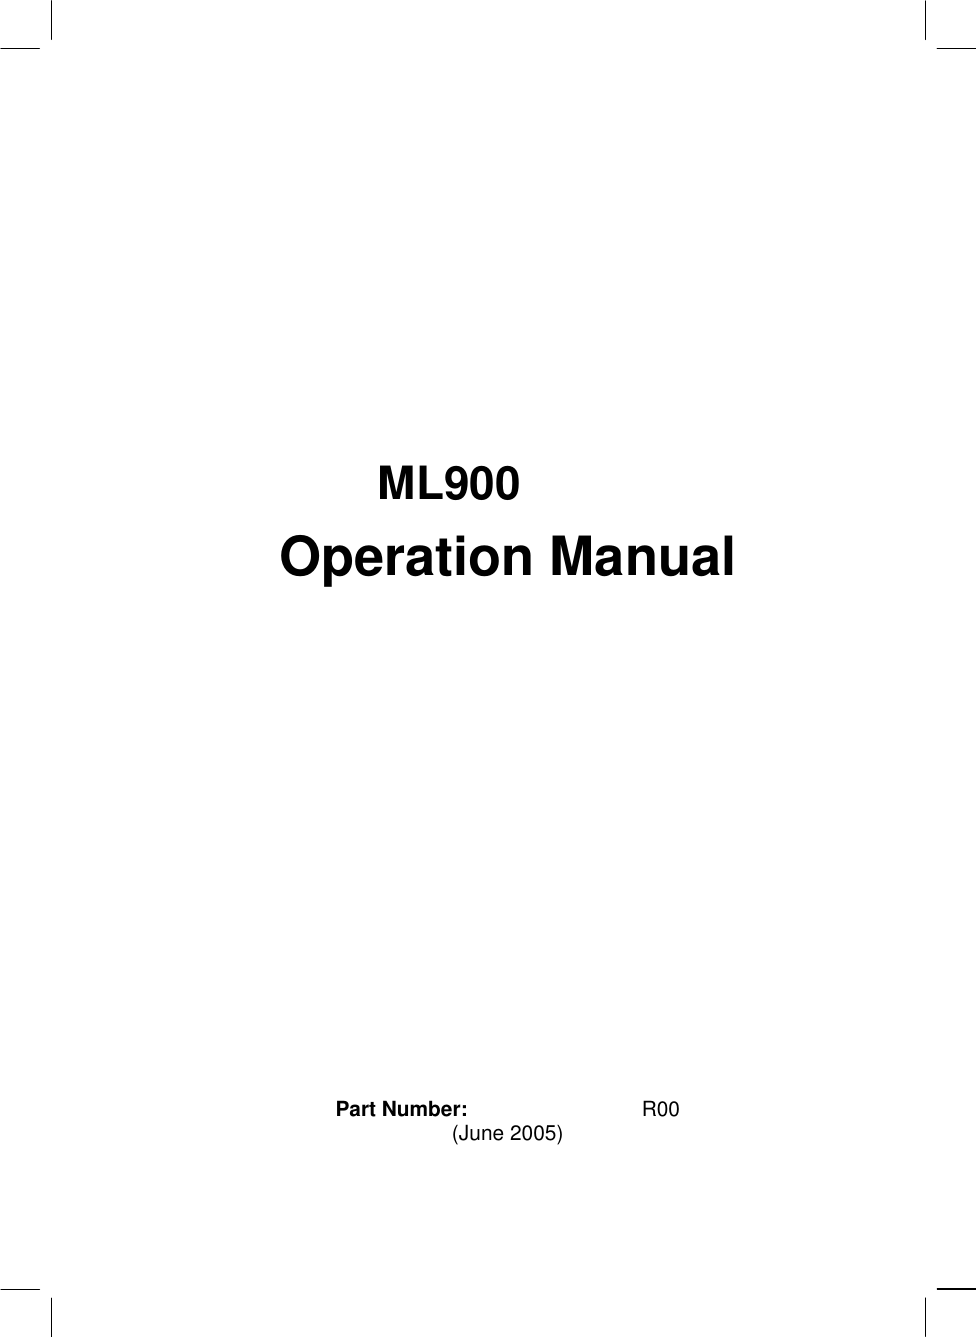           ML900Operation Manual             Part Number:  7990 0114 3001  R00 (June 2005)  